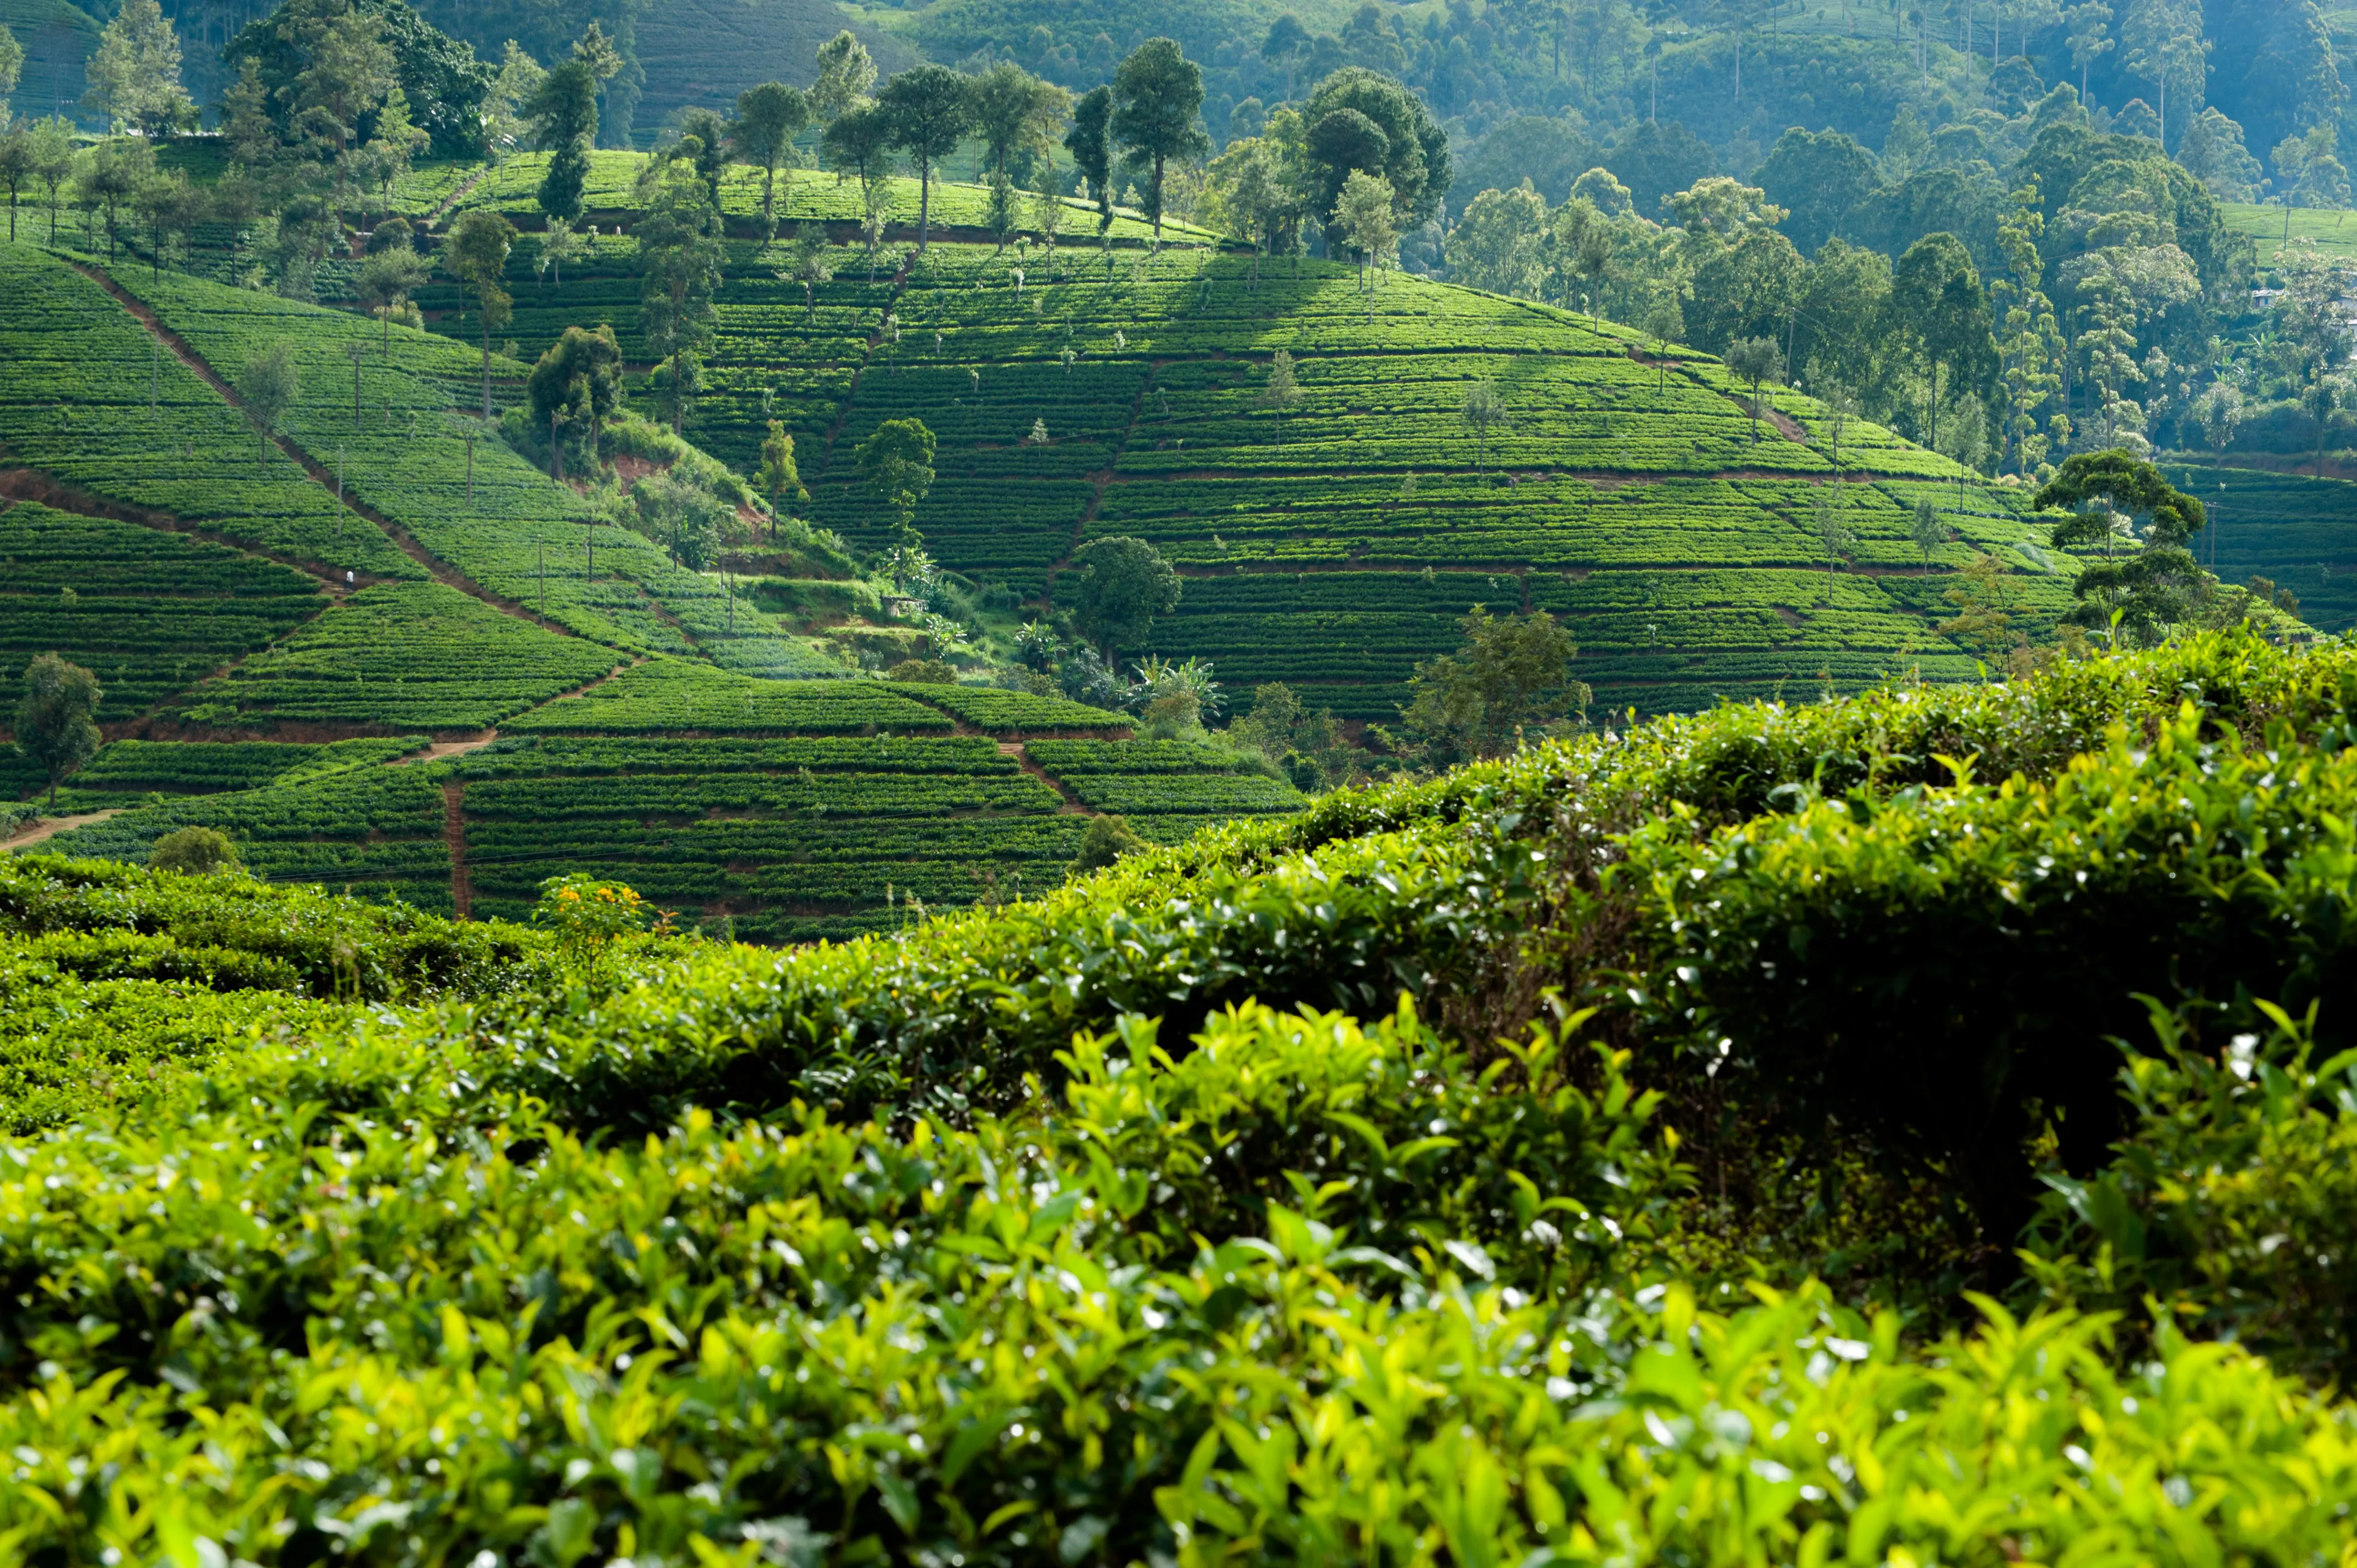 Hills with tea plants and local vegetation at Dilmah's Dessford Tea Estate